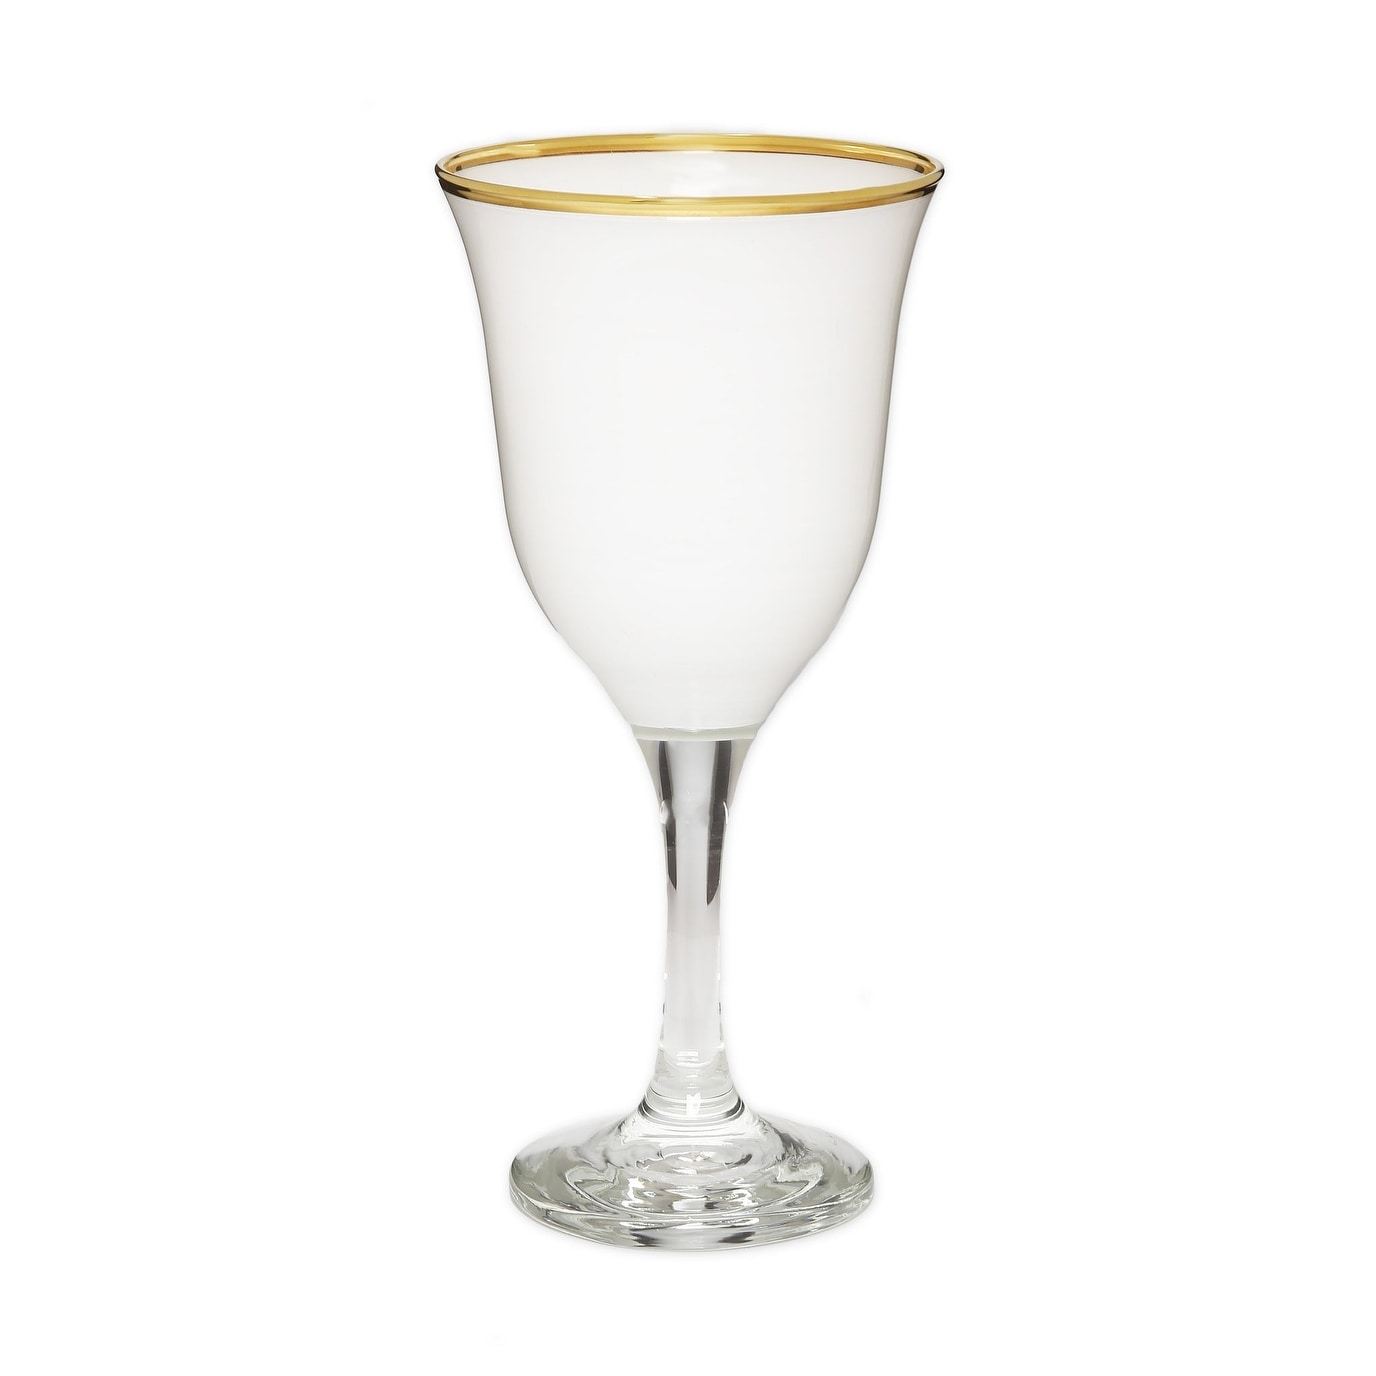 https://ak1.ostkcdn.com/images/products/is/images/direct/1327a5a2f8777662bef76dfe051d402ebad0a9d6/Set-of-6-Water-Glasses-White-with-Clear-Stem-and-Gold-Rim.jpg